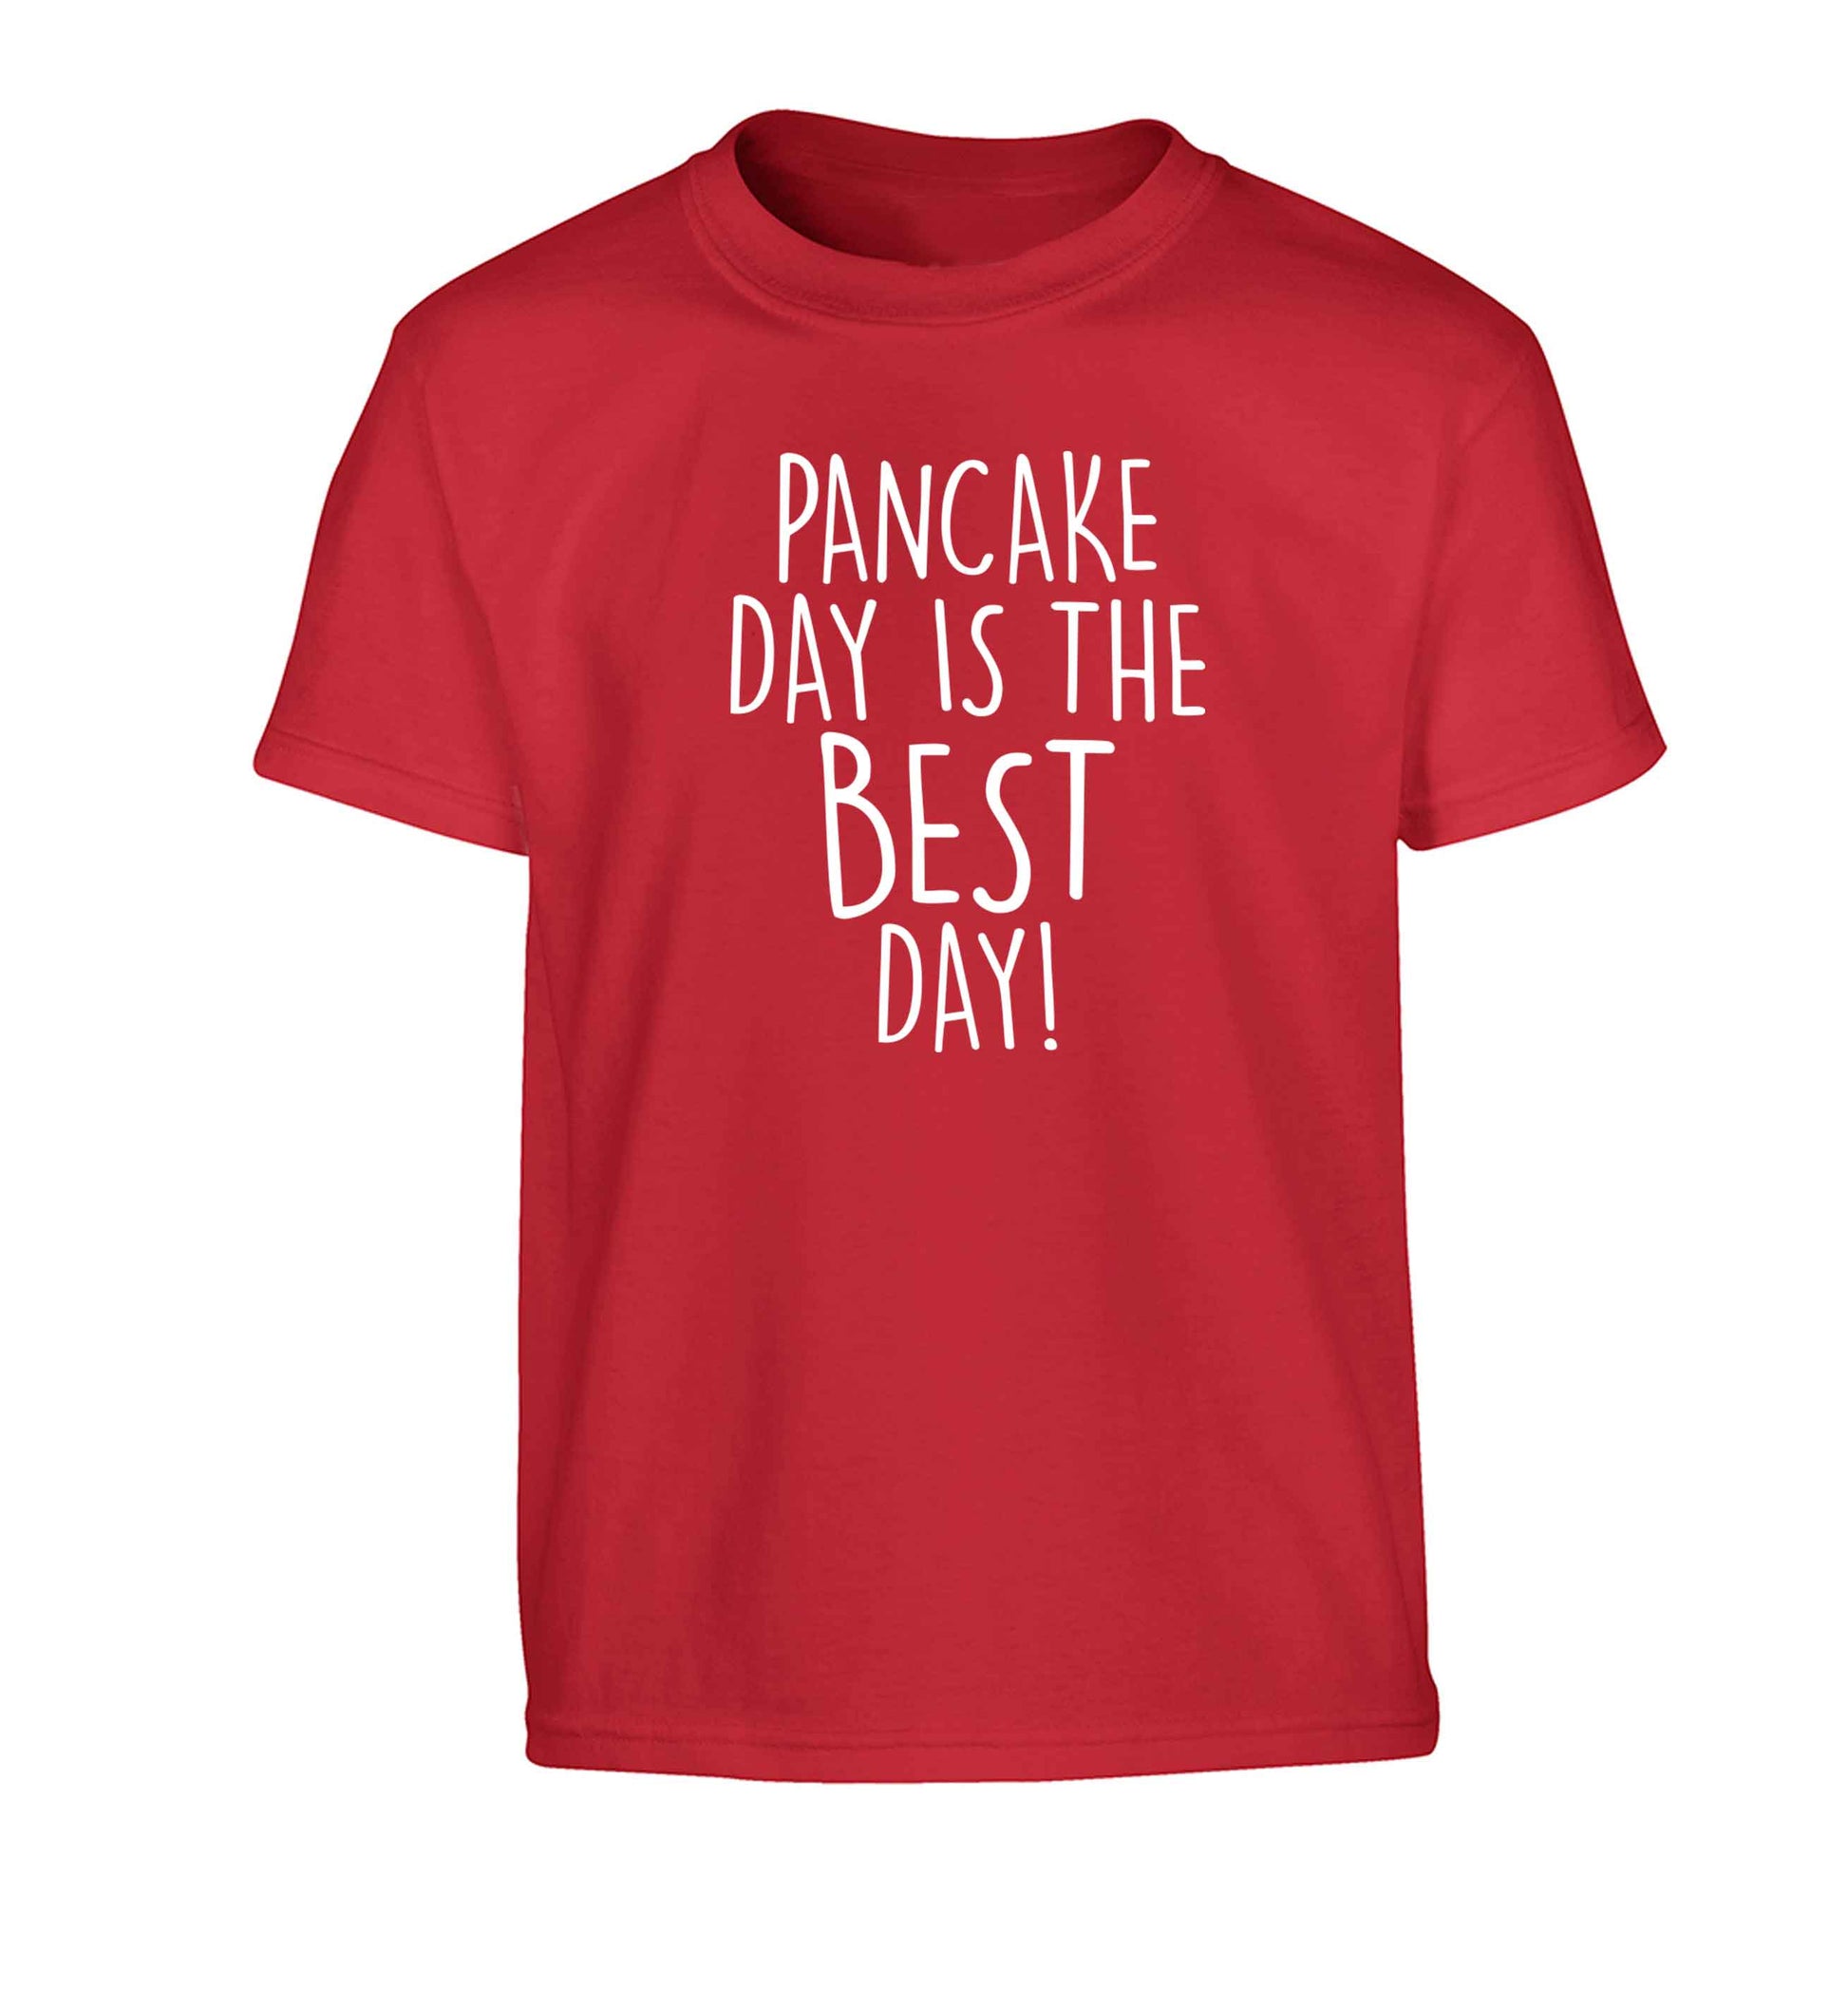 Pancake day is the best day Children's red Tshirt 12-13 Years